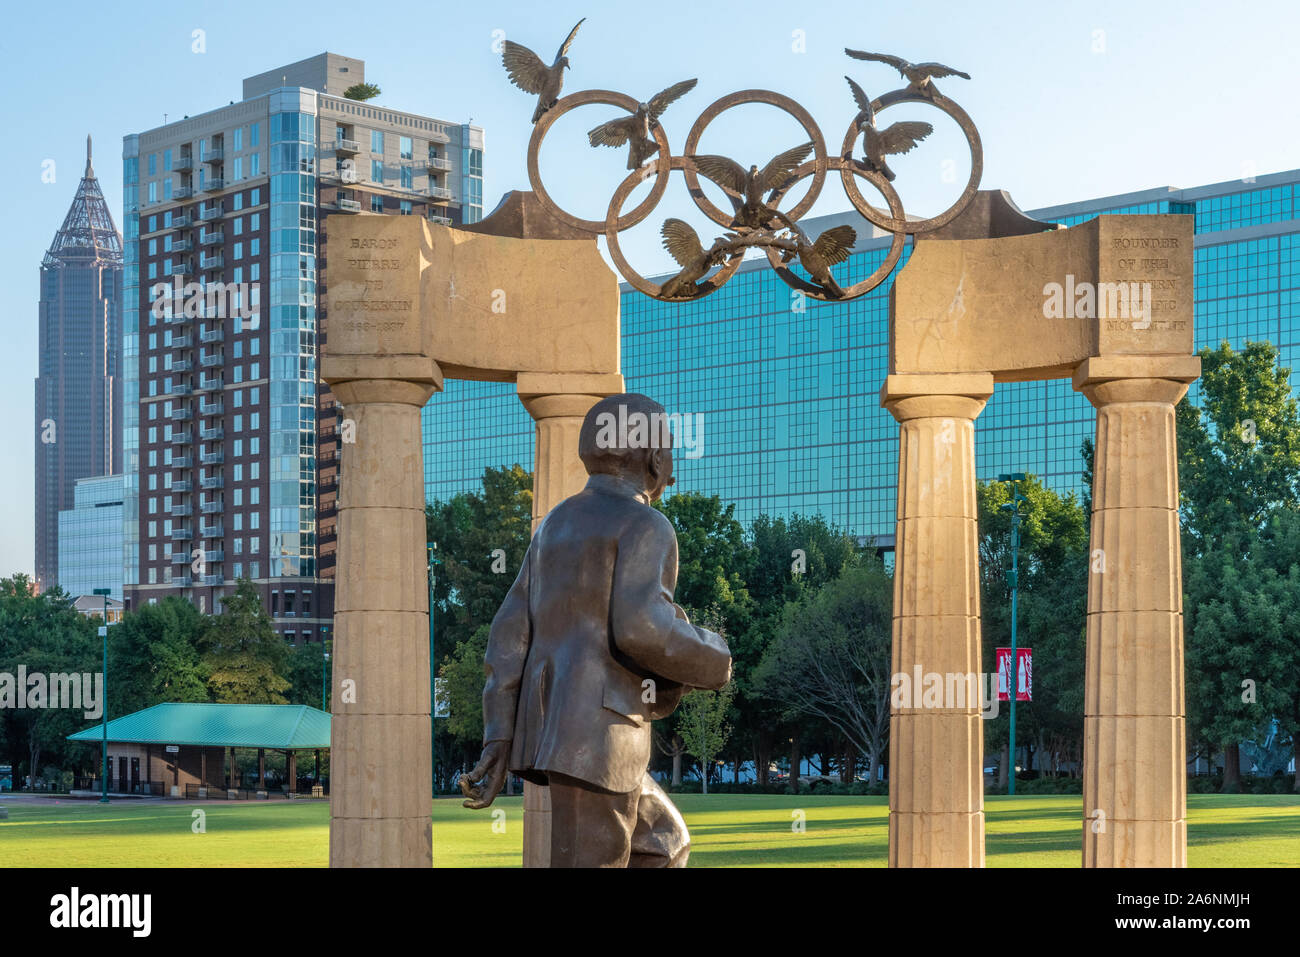 Gateway of Dreams sculpture of Pierre de Coubertin, founder of the International Olympic Committee, at Centennial Olympic Park in Atlanta, GA. (USA) Stock Photo